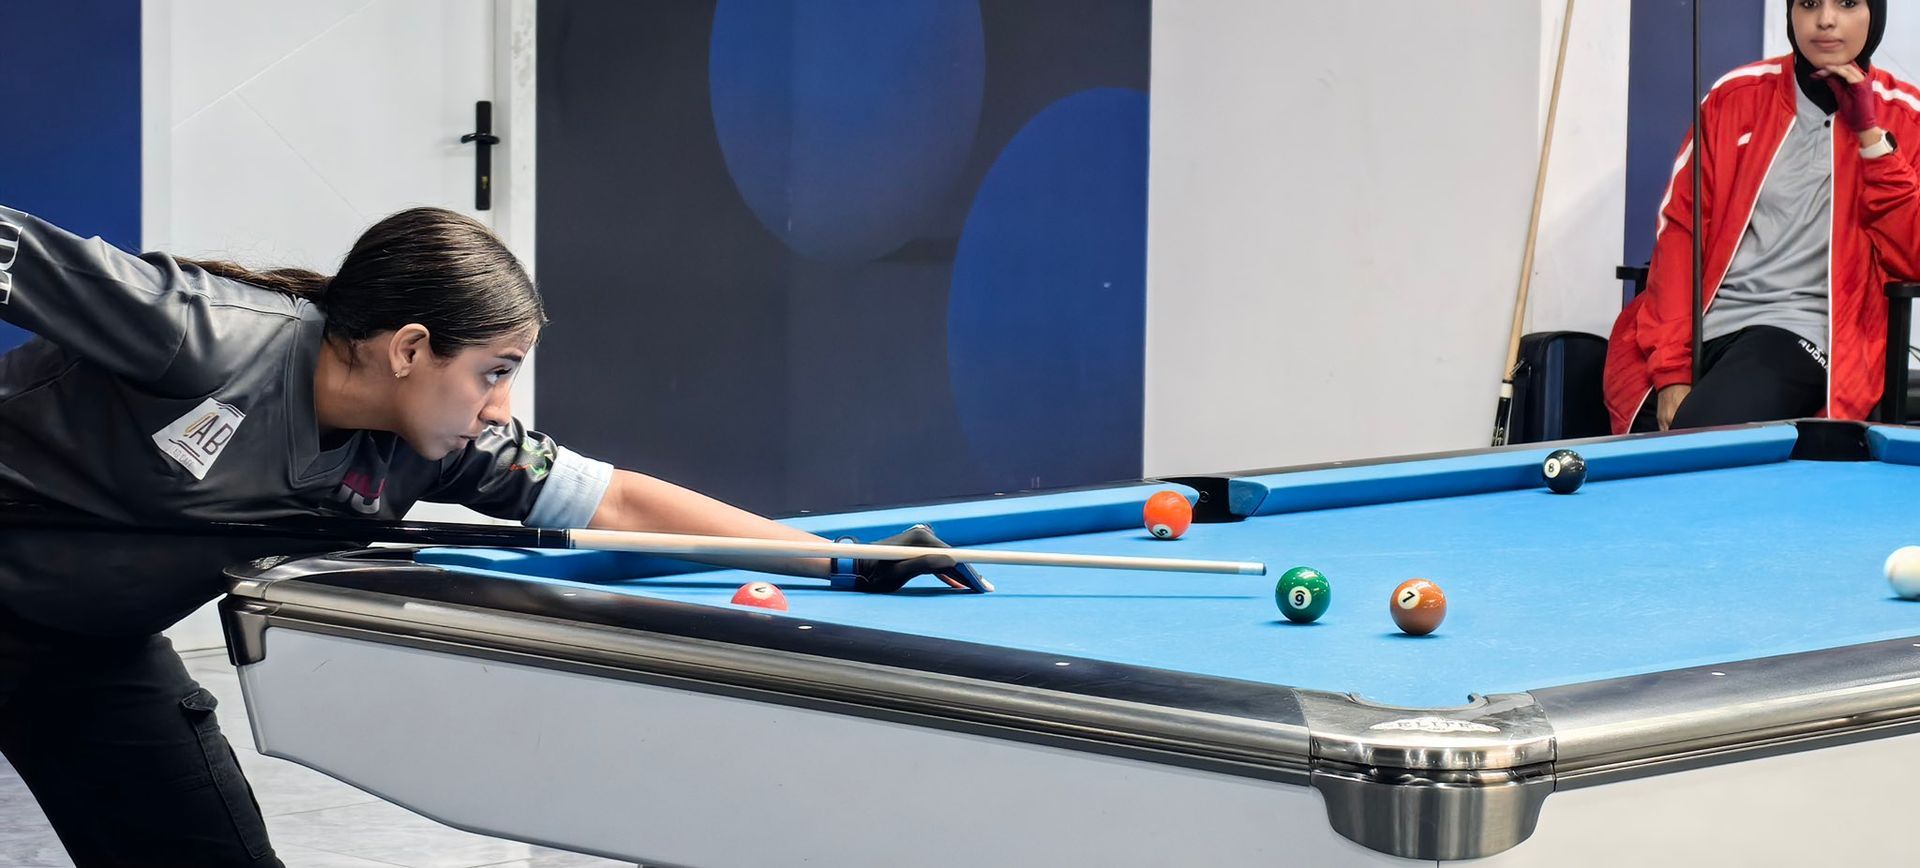 A woman is playing pool